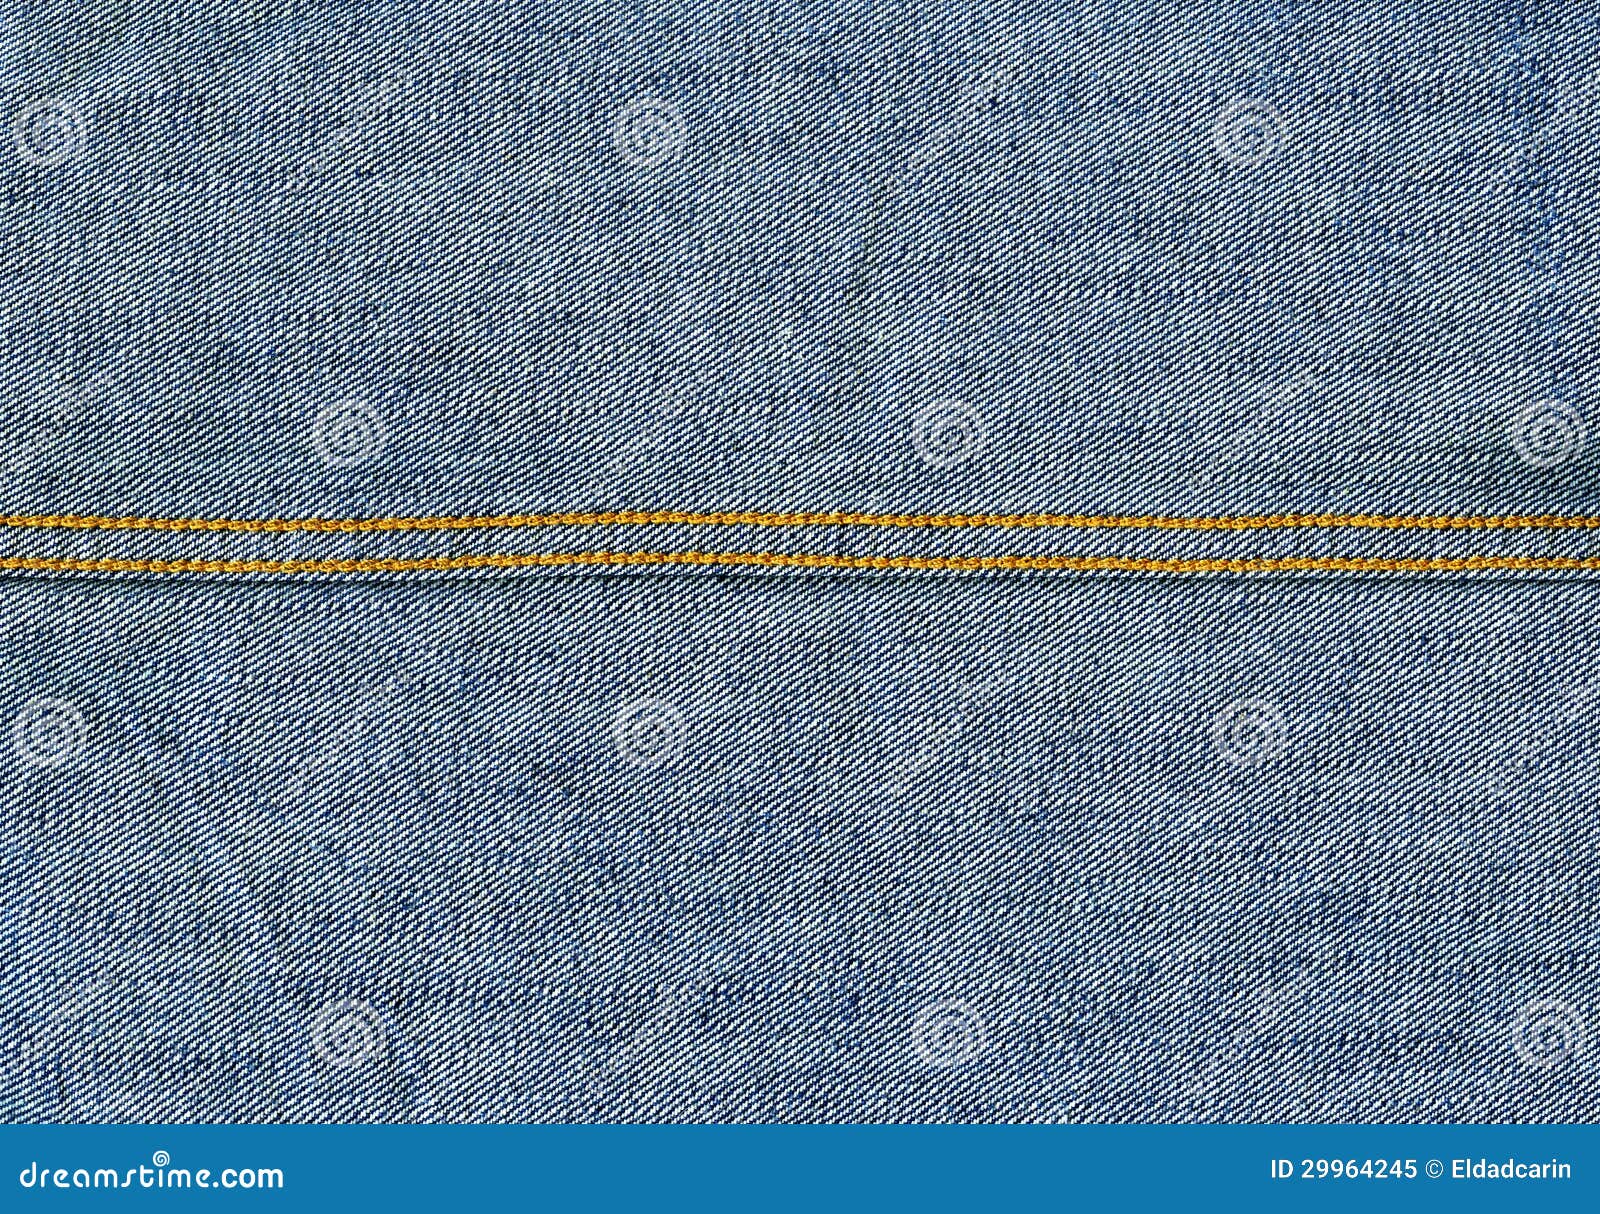 Denim Fabric Texture - Light Blue with Seams Stock Image - Image of ...